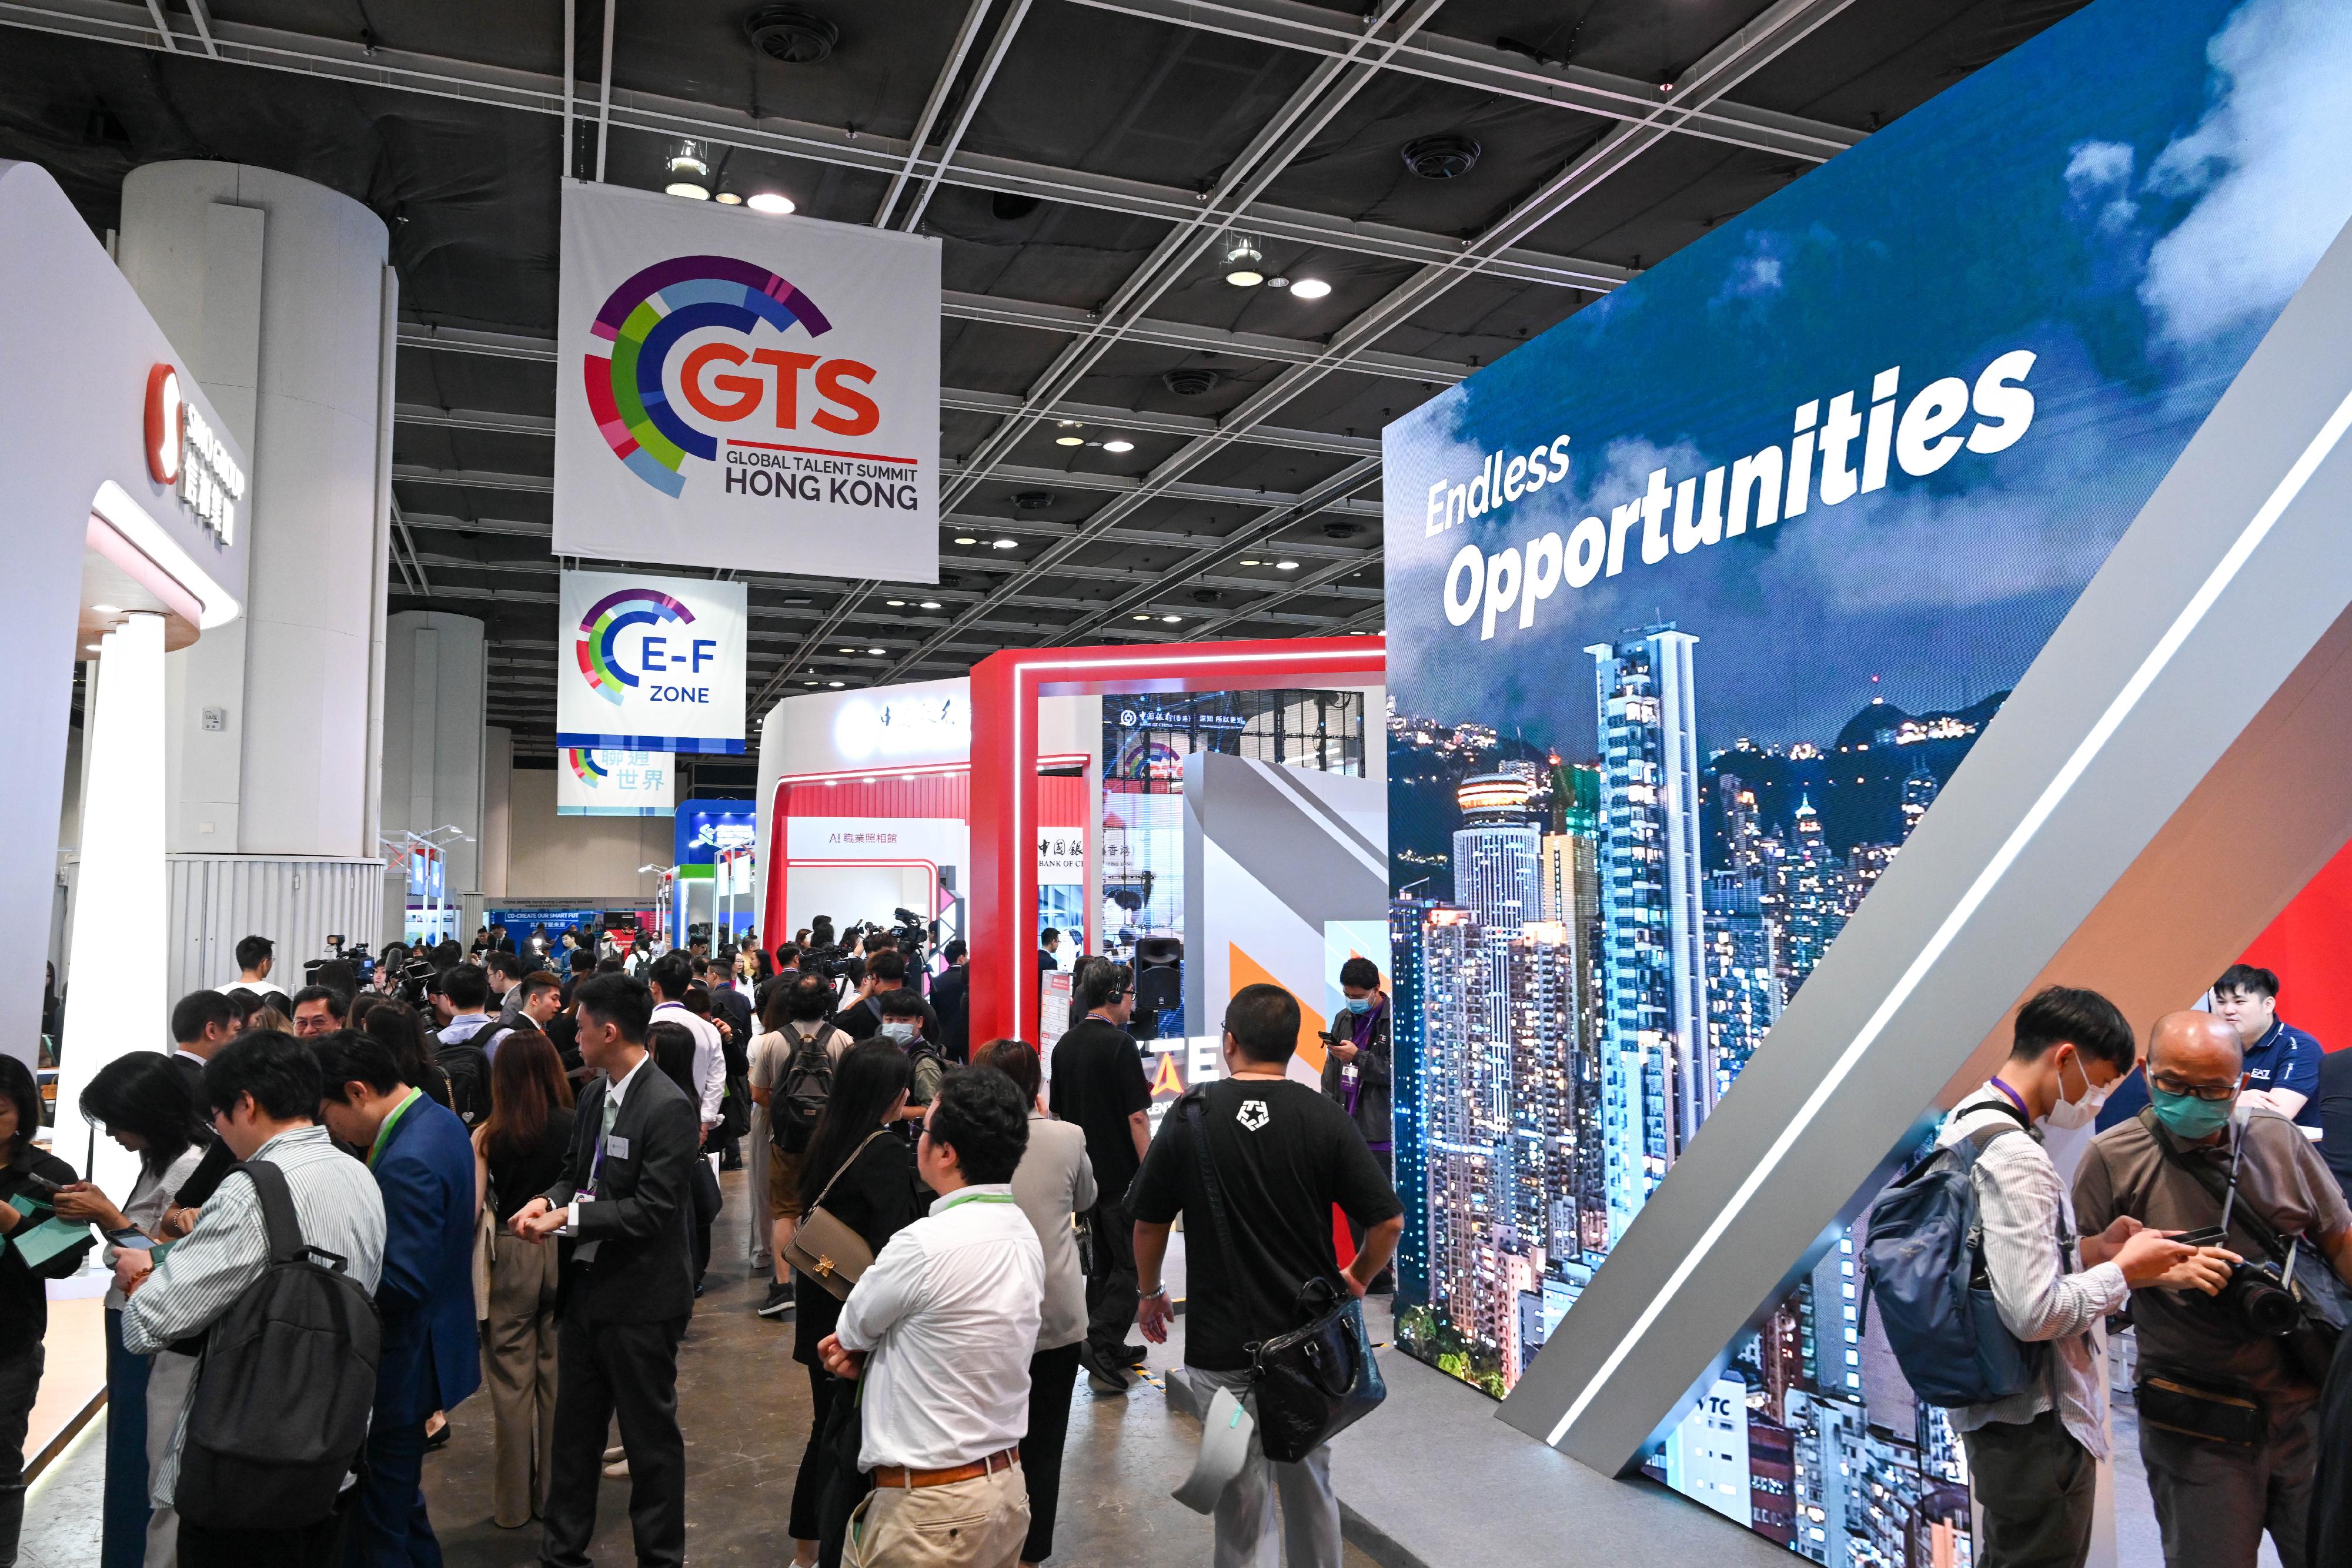 The two-day Global Talent Summit · Hong Kong comprised the International Talent Forum yesterday (May 7), the Second Guangdong-Hong Kong-Macao GBA High-quality Talent Development Conference today (May 8) and the CareerConnect Expo on both days concurrently. It concluded this afternoon.